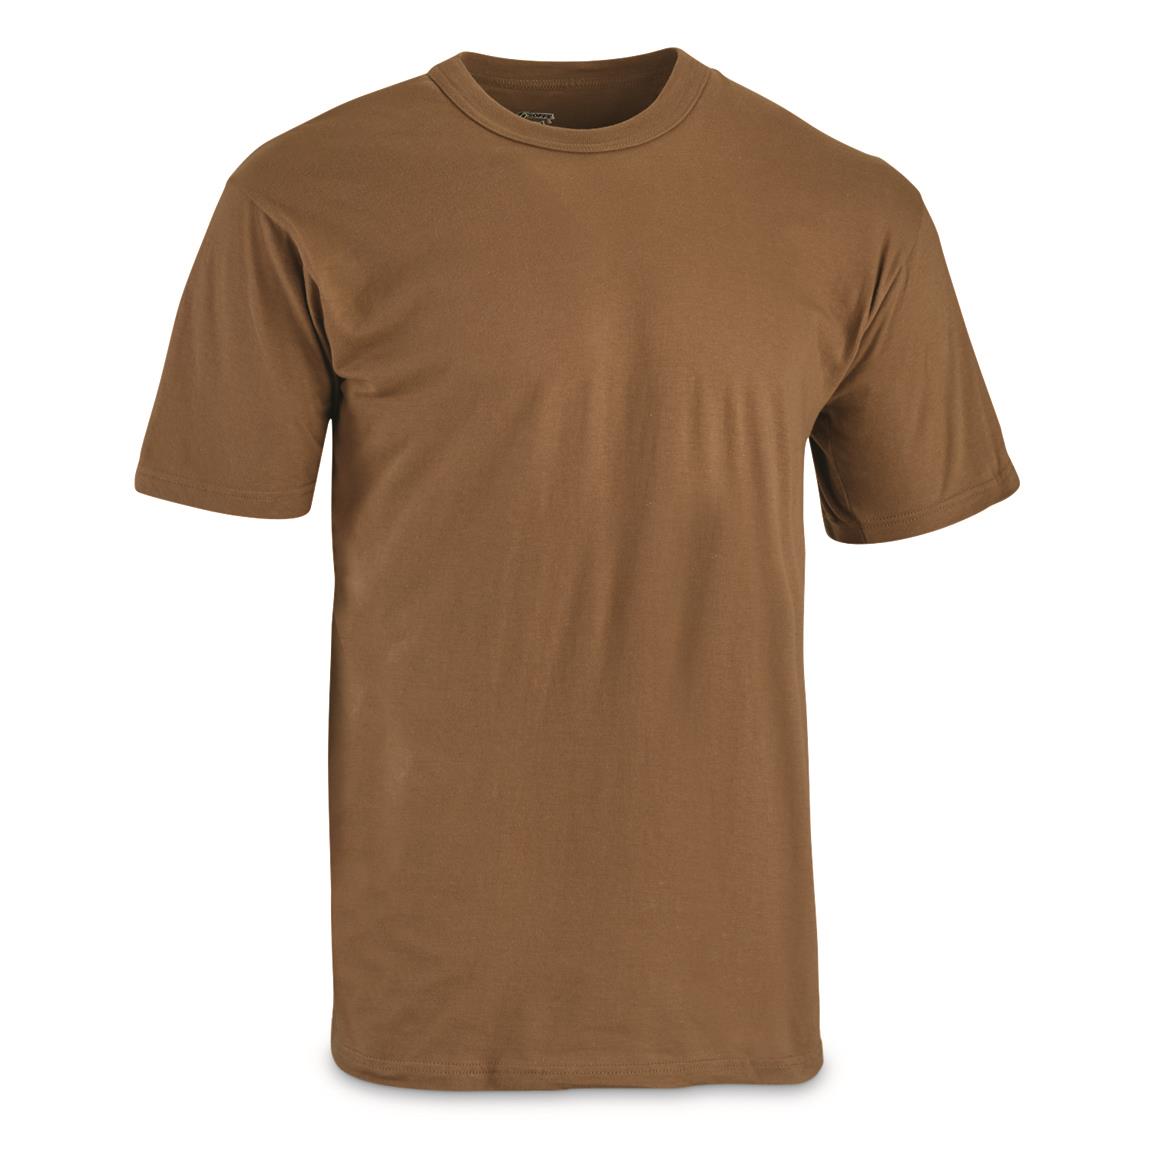 U.S. Military Surplus 100% Cotton Short Sleeve T-Shirts, 4 pack, New, Brown